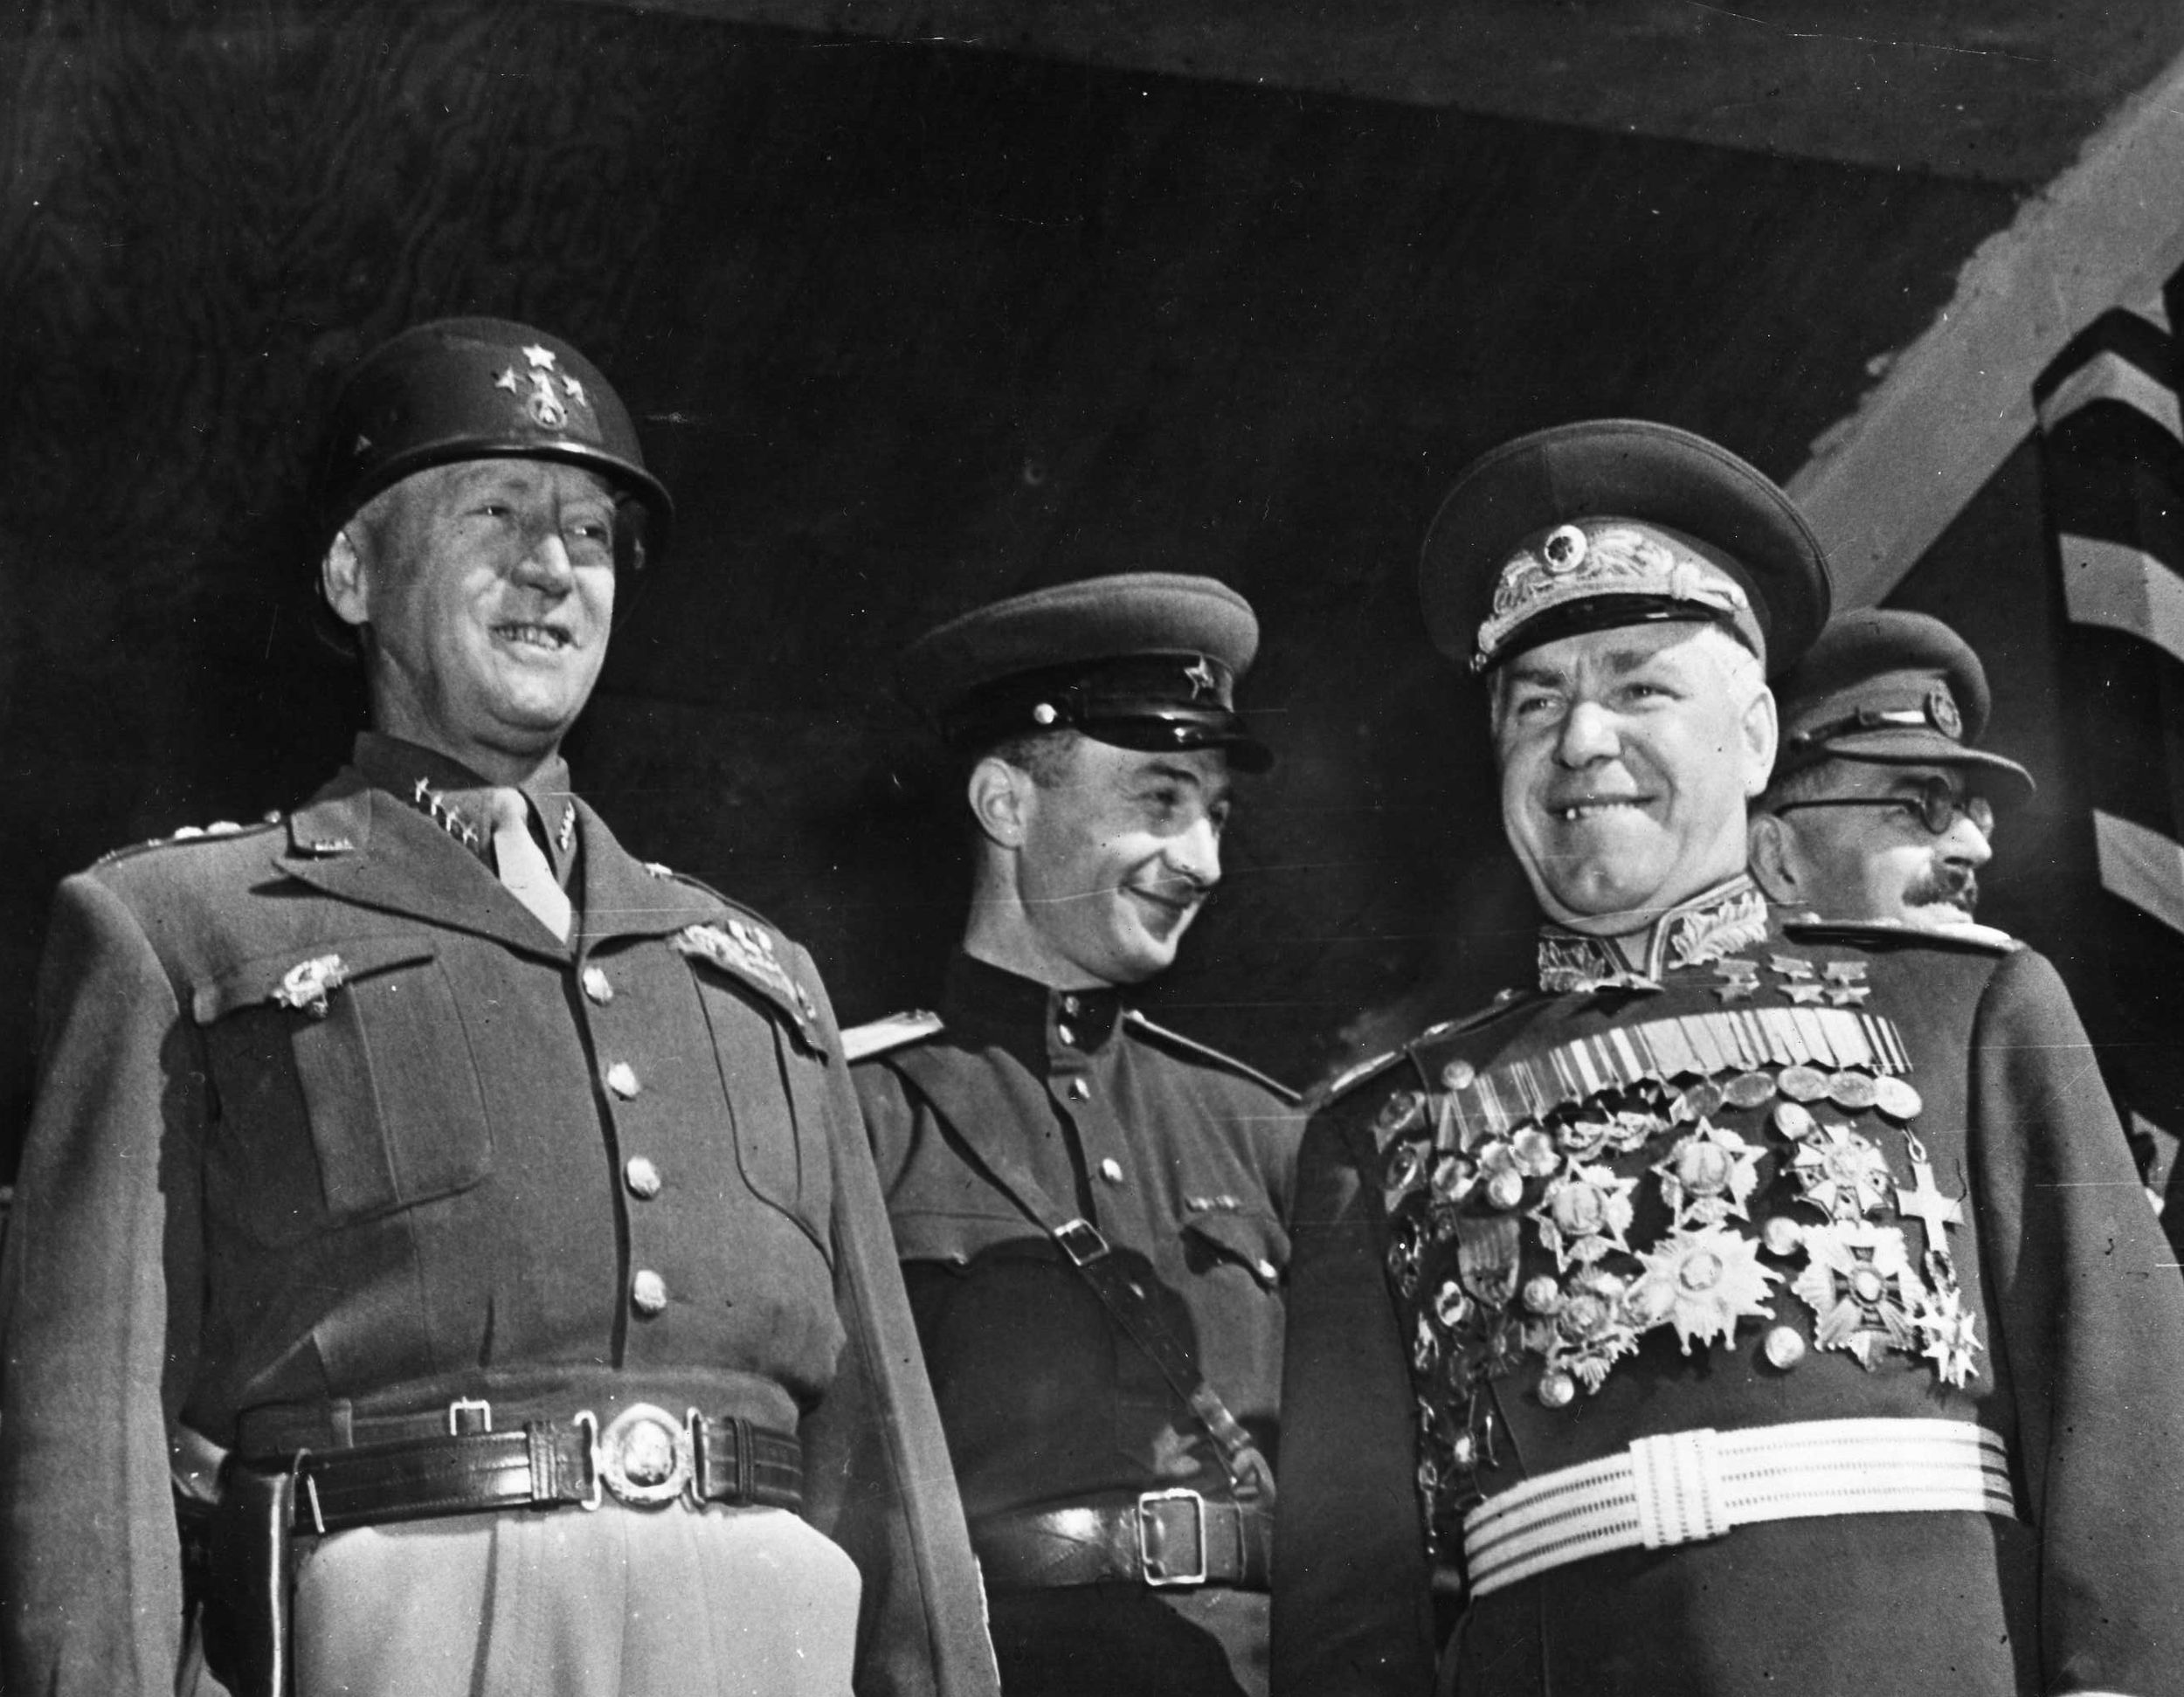 General George S. Patton, Jr., (left) strains to smile in company with Marshal Georgi Zhukov during a September 7, 1945, parade in Berlin. The two were present during activities celebrating the Allied victory over Japan.